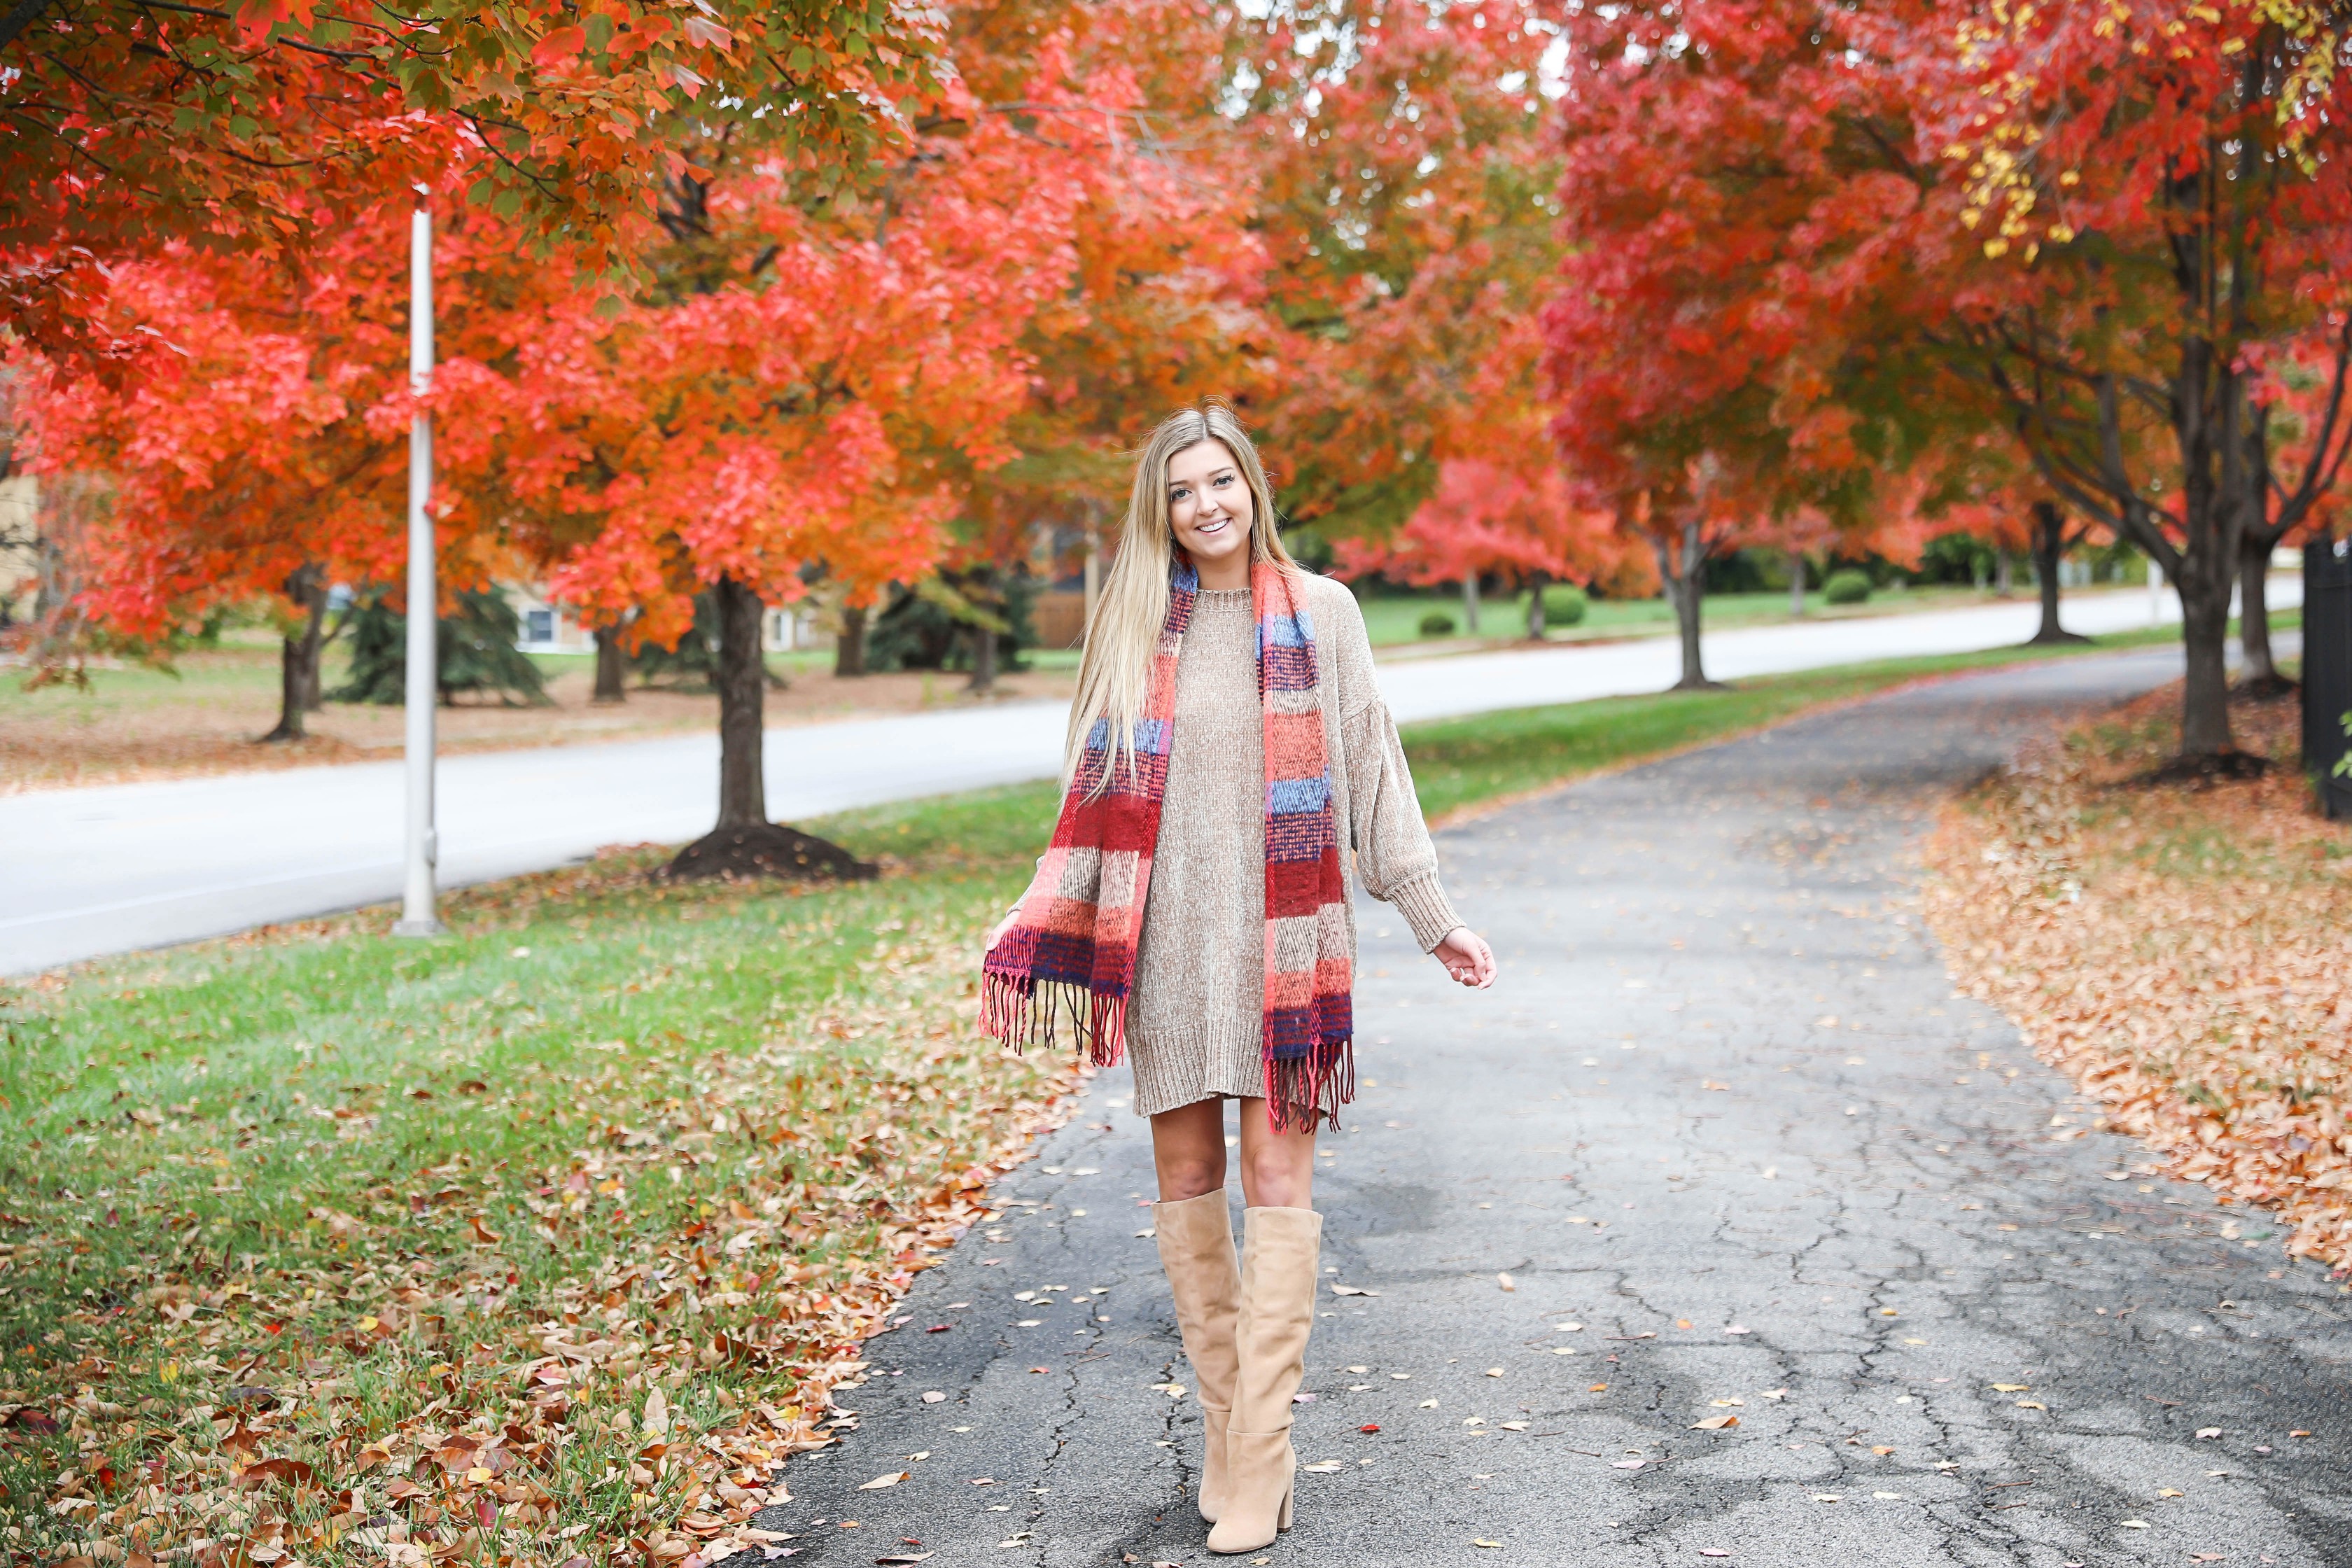 Chenille sweater dress form Red Dress Boutique! I love sweater dresses and chenille is my favorite trend for fall 2018! I paired it with this cute plaid scarf and my favorite tan boots! Nothing like a cute fall outfit in front of beautiful red autumn leaves on the trees! Details on fashion blog daily dose of charm by lauren lindmark